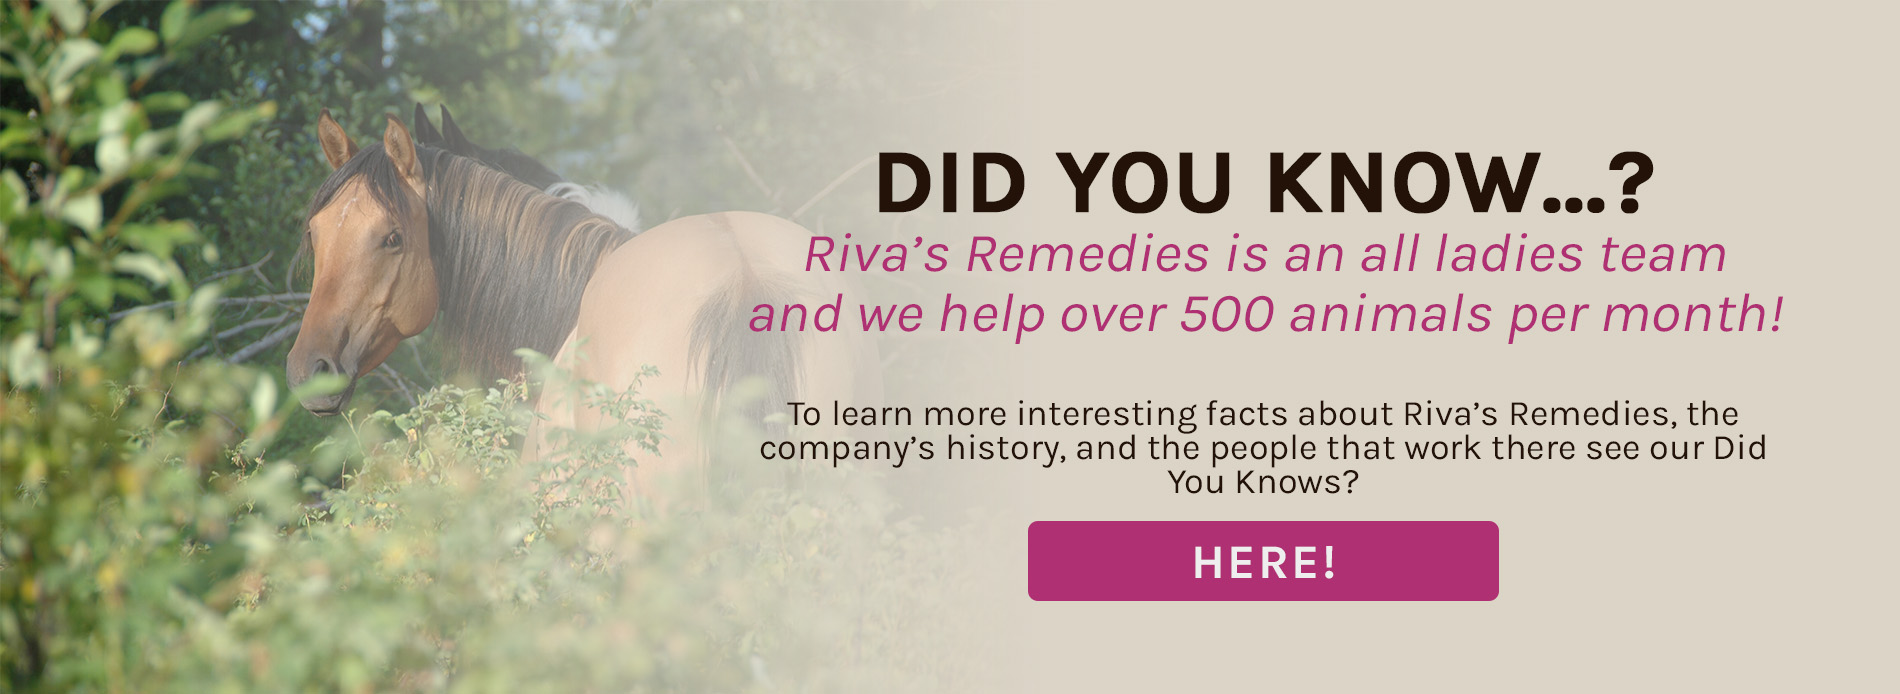 Did you know about Rivas Remedies